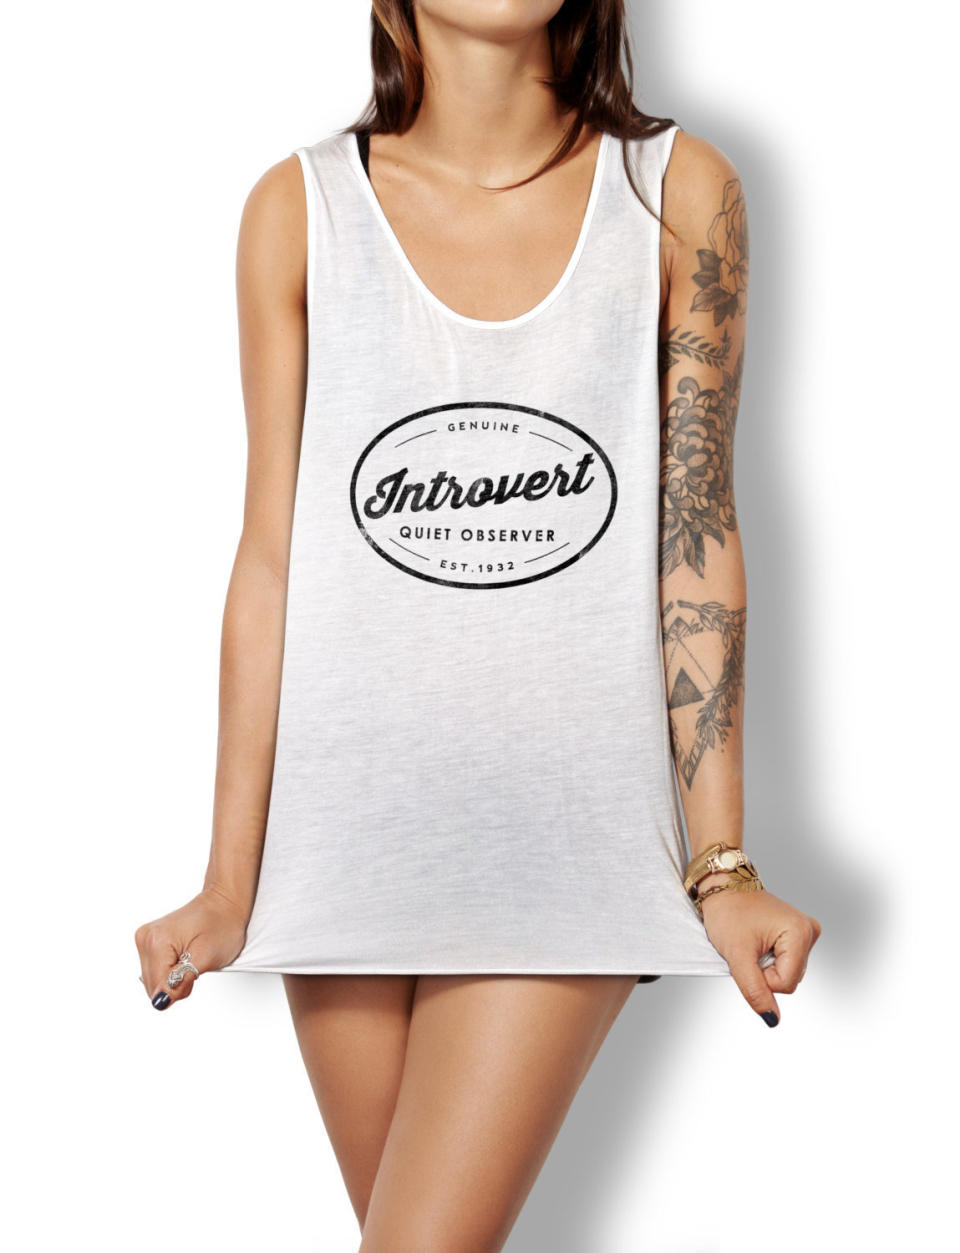 <a href="https://www.etsy.com/listing/450038420/introverted-tank-im-an-introvert-shirt?ga_order=most_relevant&amp;ga_search_type=all&amp;ga_view_type=gallery&amp;ga_search_query=introvert&amp;ref=sr_gallery_12" target="_blank">Introverted Tank</a>, $23.99 on <a href="https://www.etsy.com/?ref=lgo" target="_blank">Etsy</a>